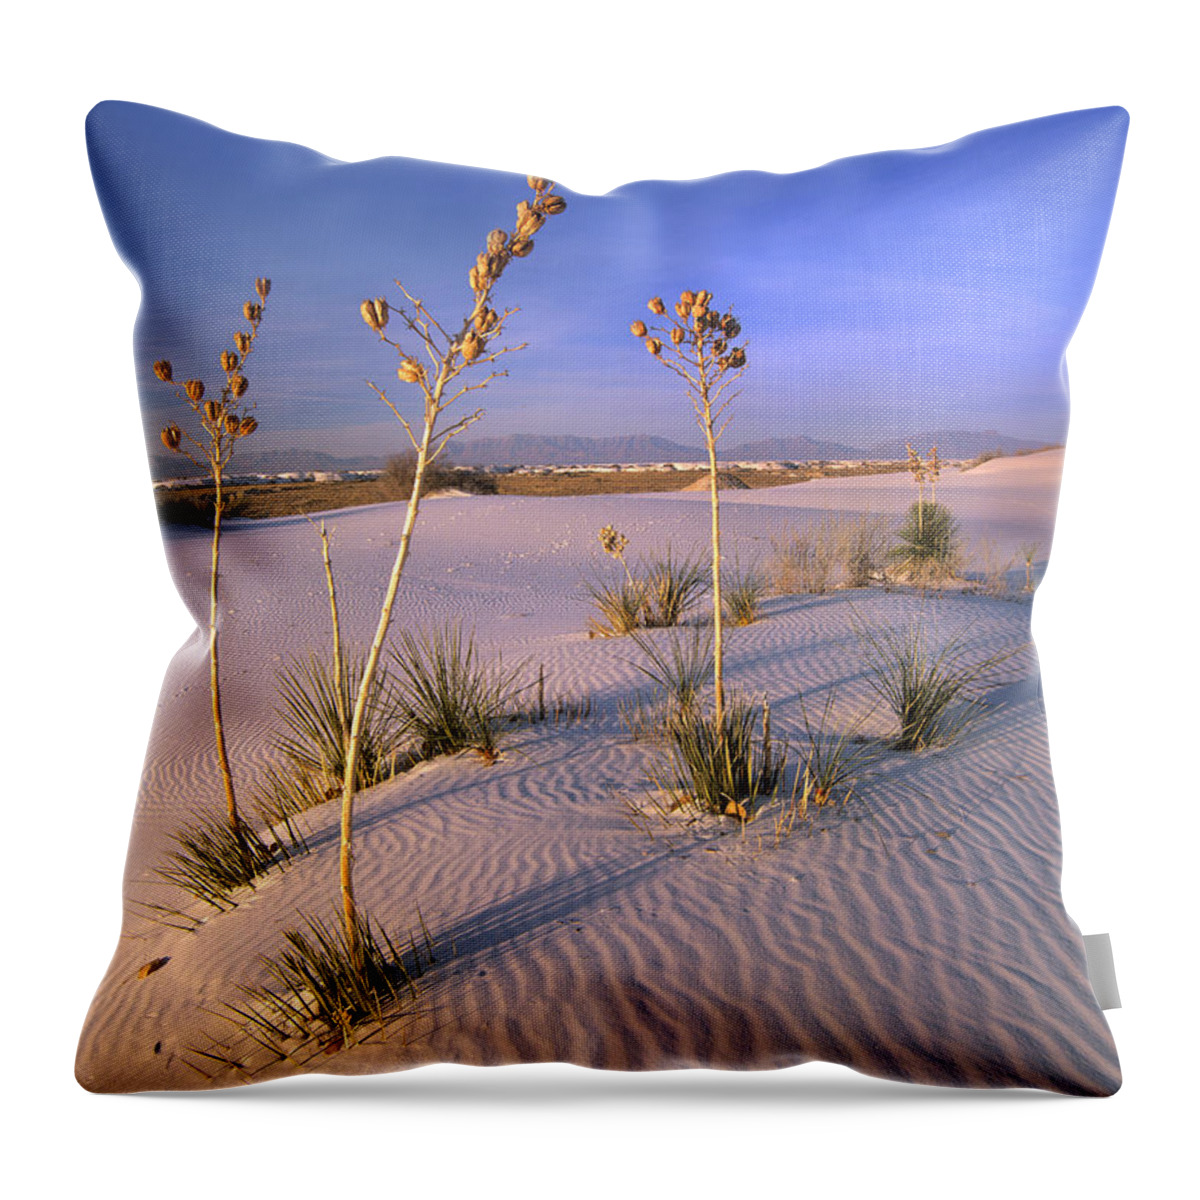 00176857 Throw Pillow featuring the photograph White Sands National Monument New Mexico #1 by Tim Fitzharris